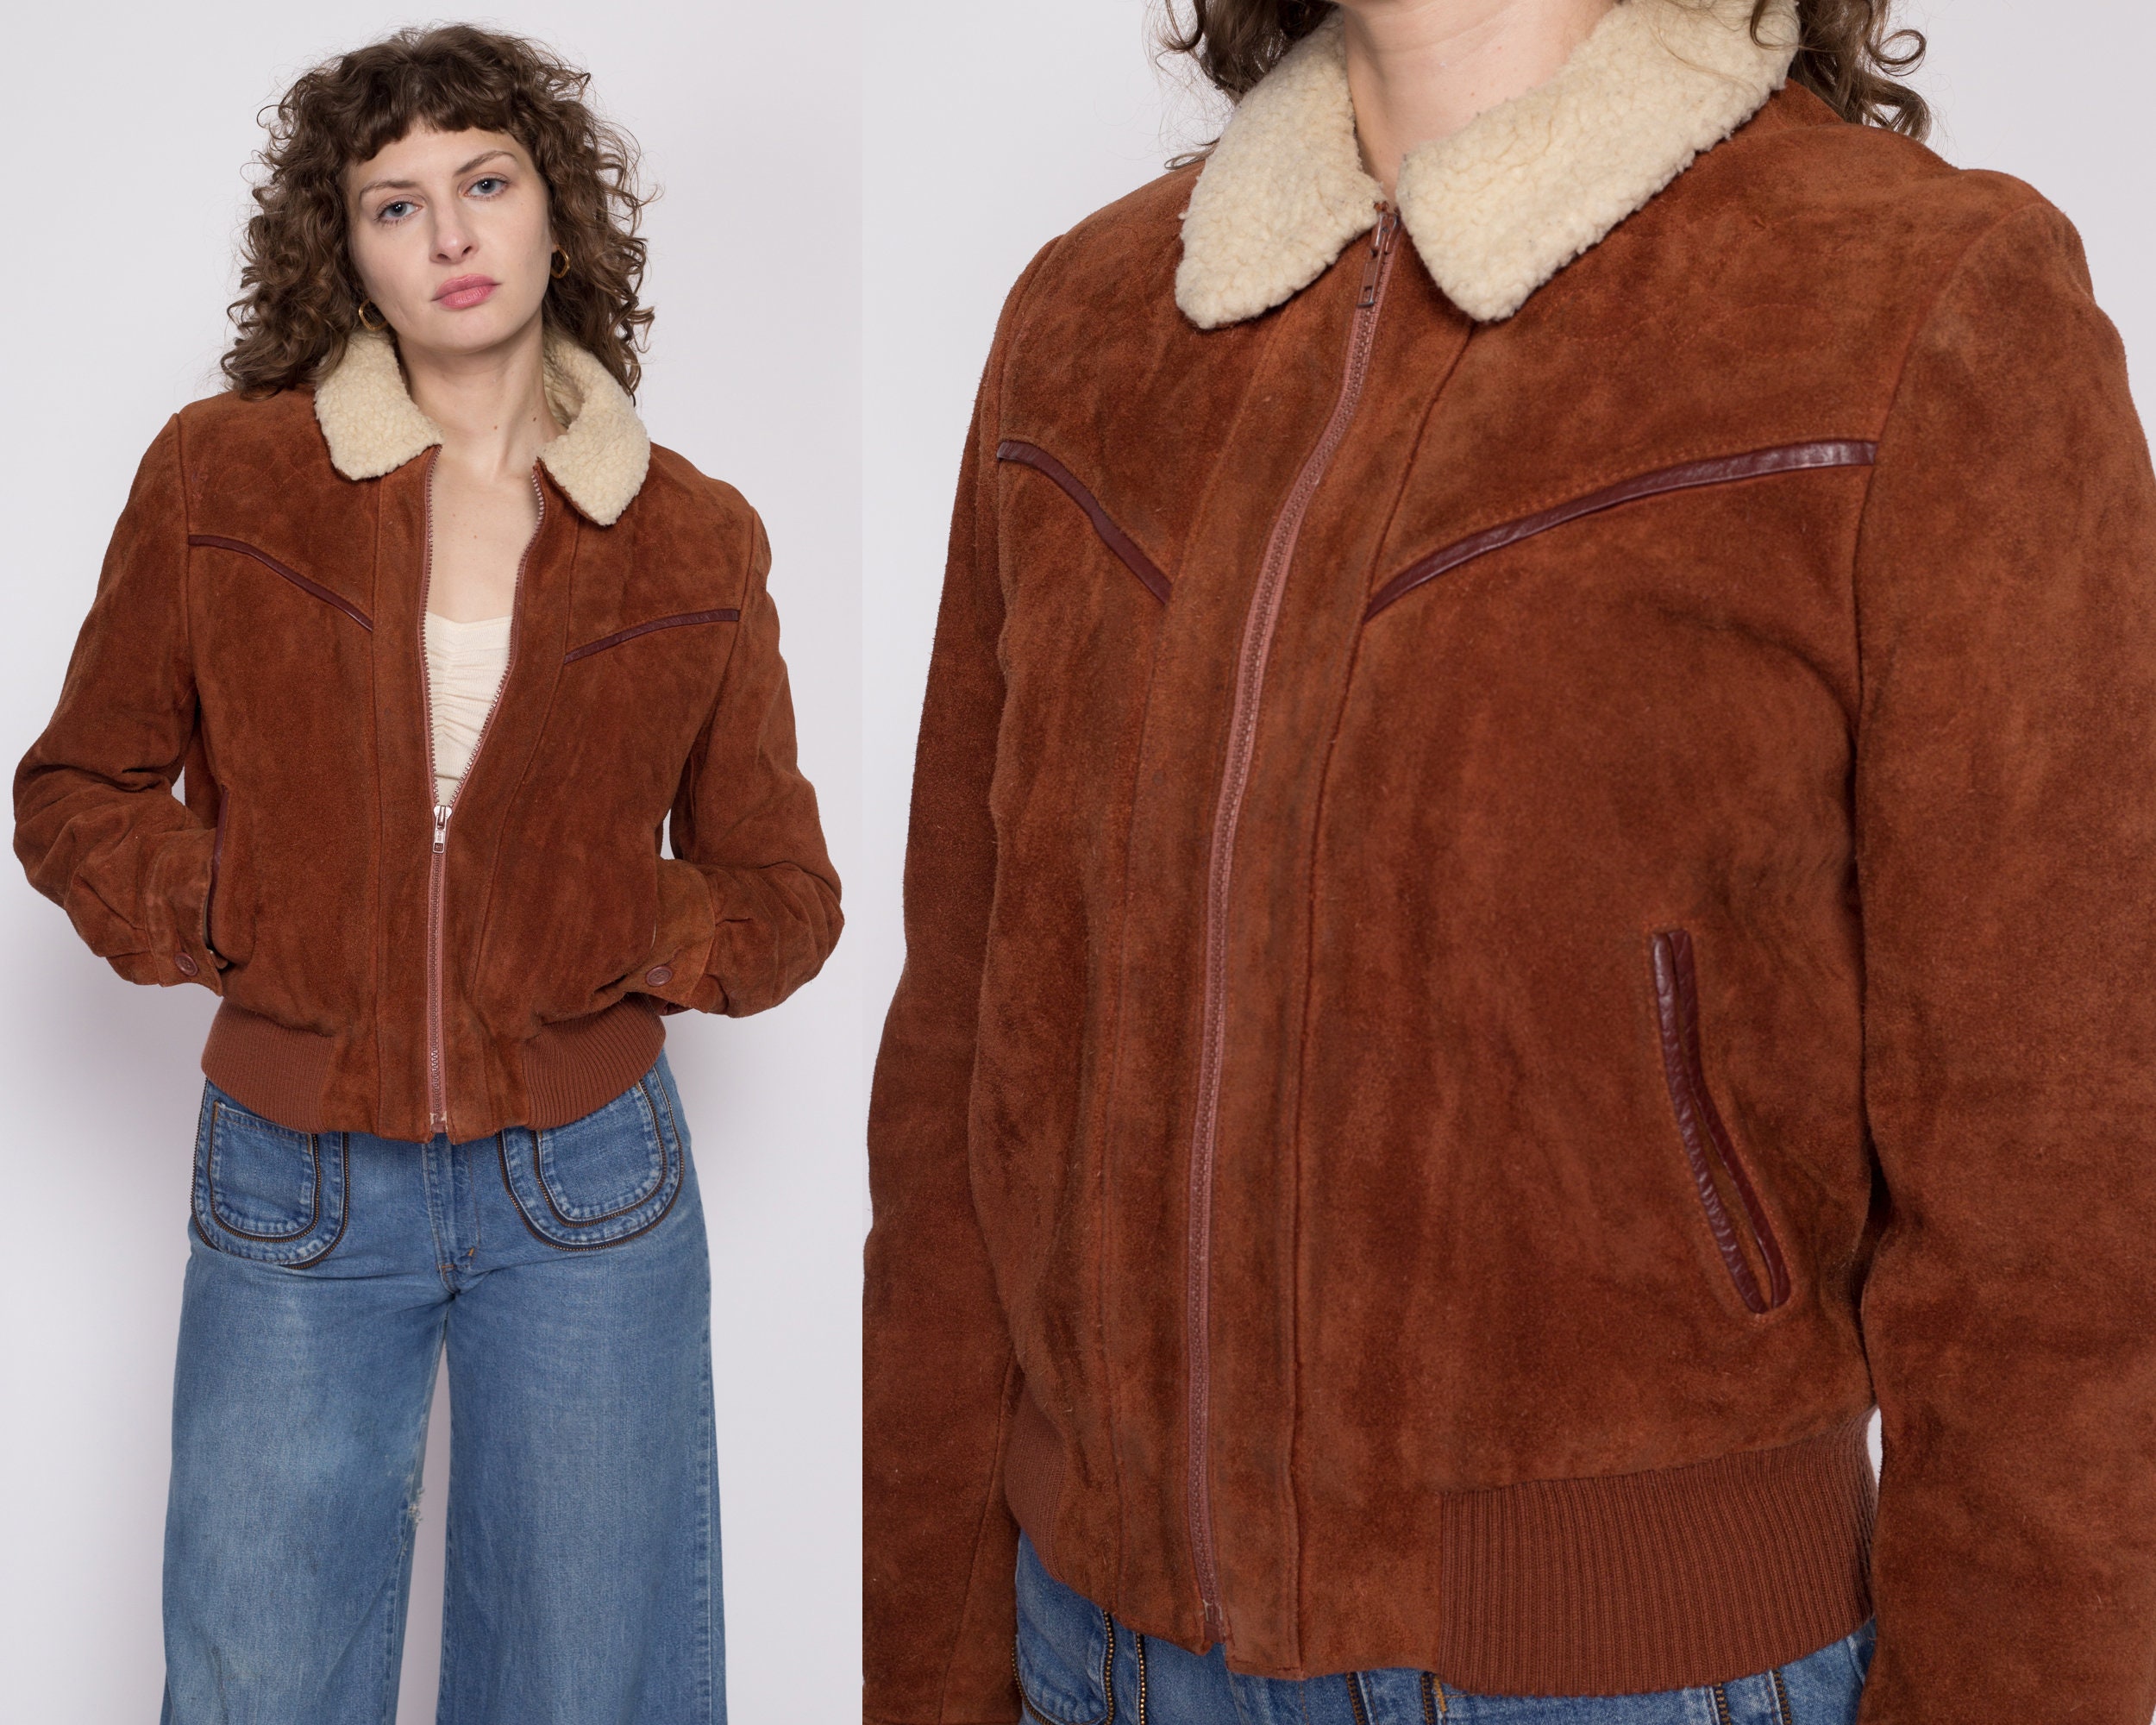 Jacket, Suede Jean Jacket Style with Faux Shearling Large / Old Rust